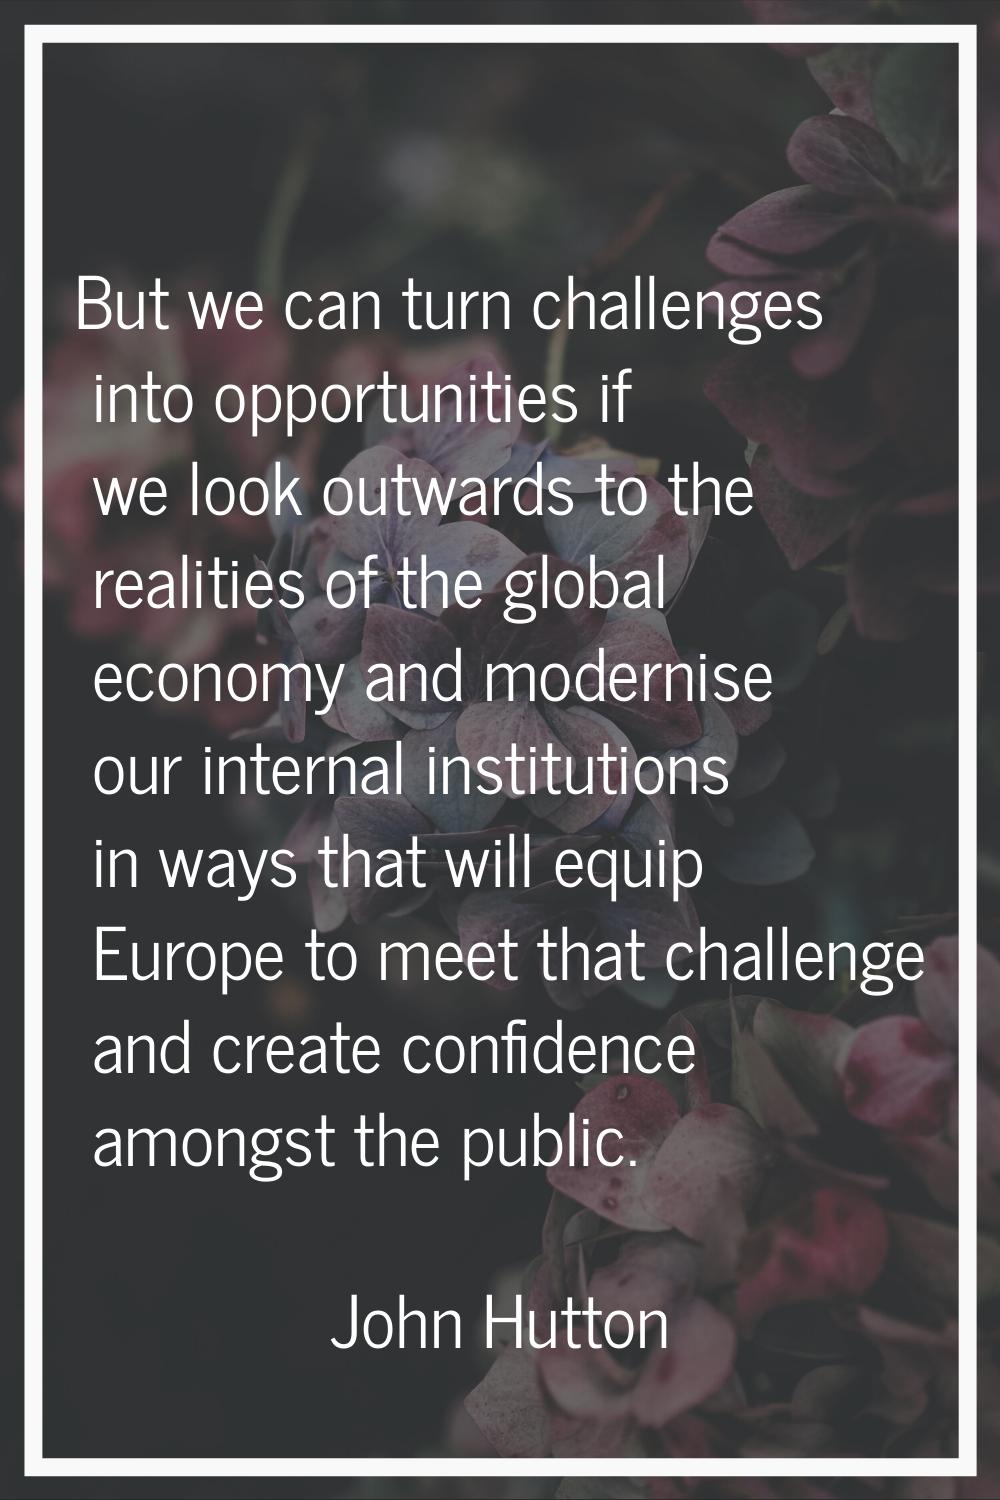 But we can turn challenges into opportunities if we look outwards to the realities of the global ec